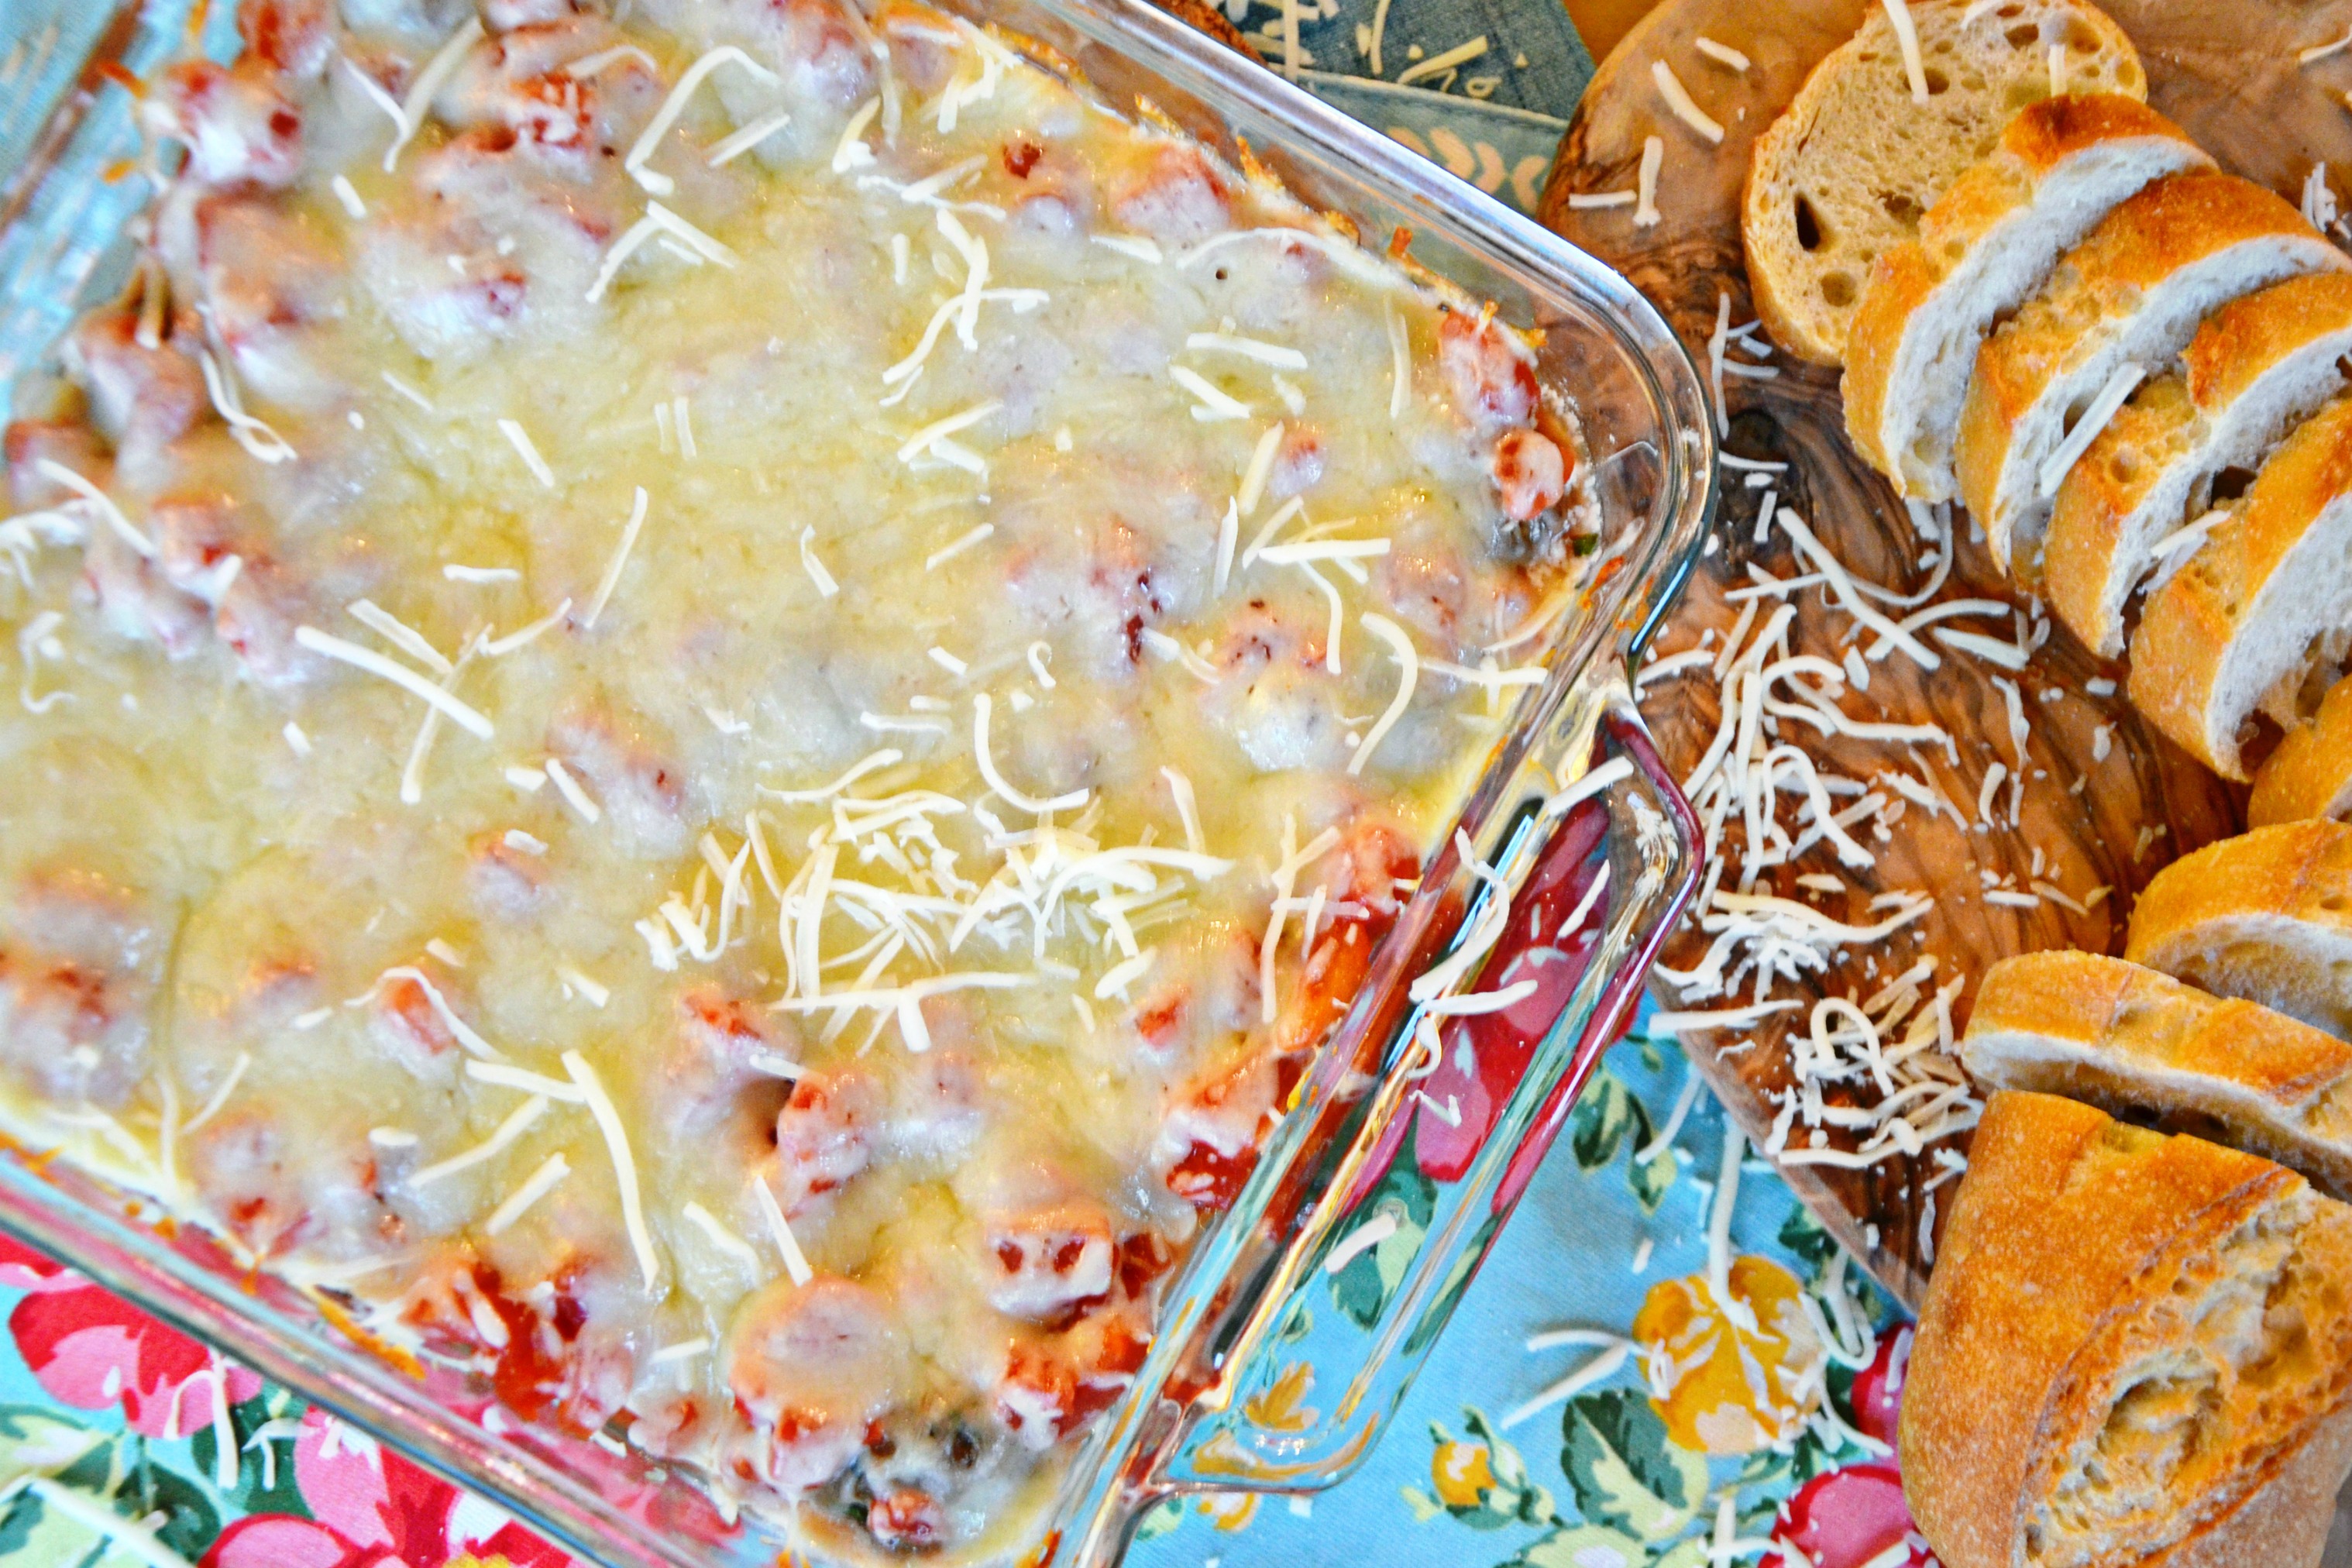 This yummy Italian meatball dip recipe is topped with mozzarella cheese and best served warm with bread.